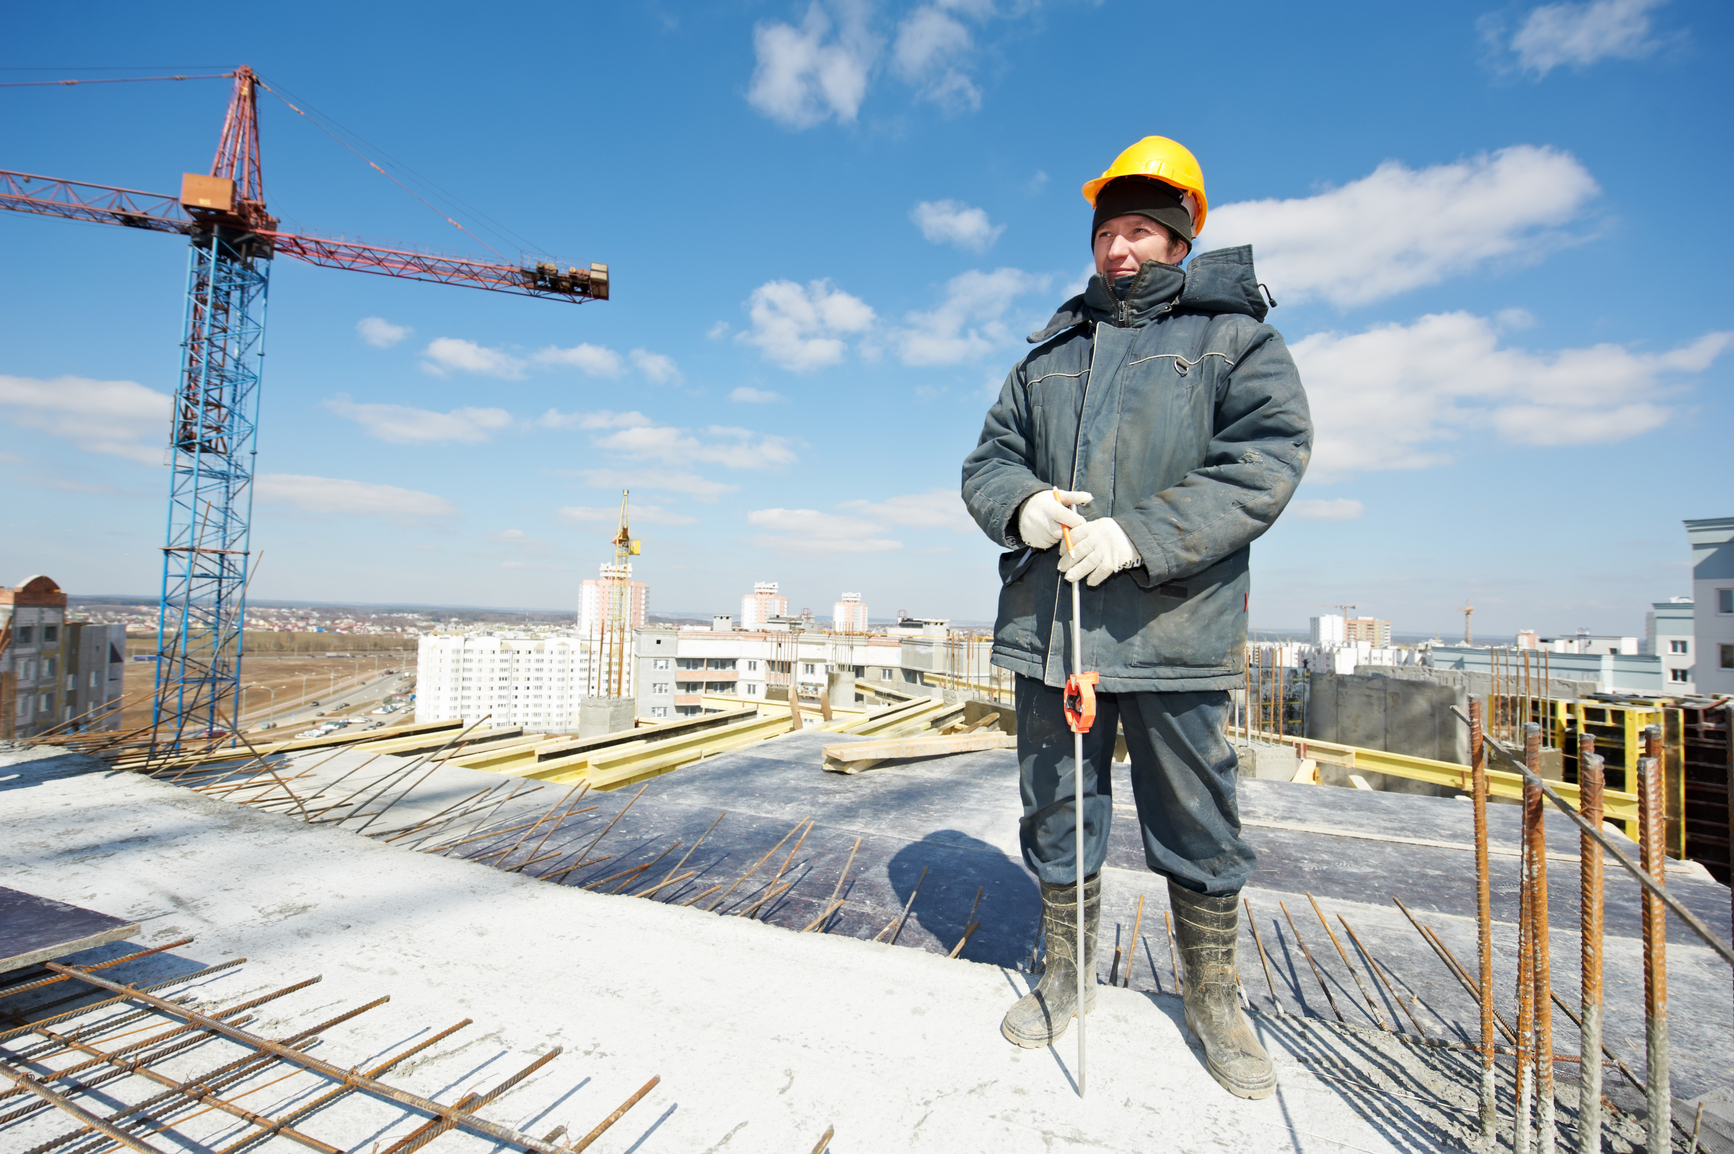 Winter Safety Tips for Construction Workers